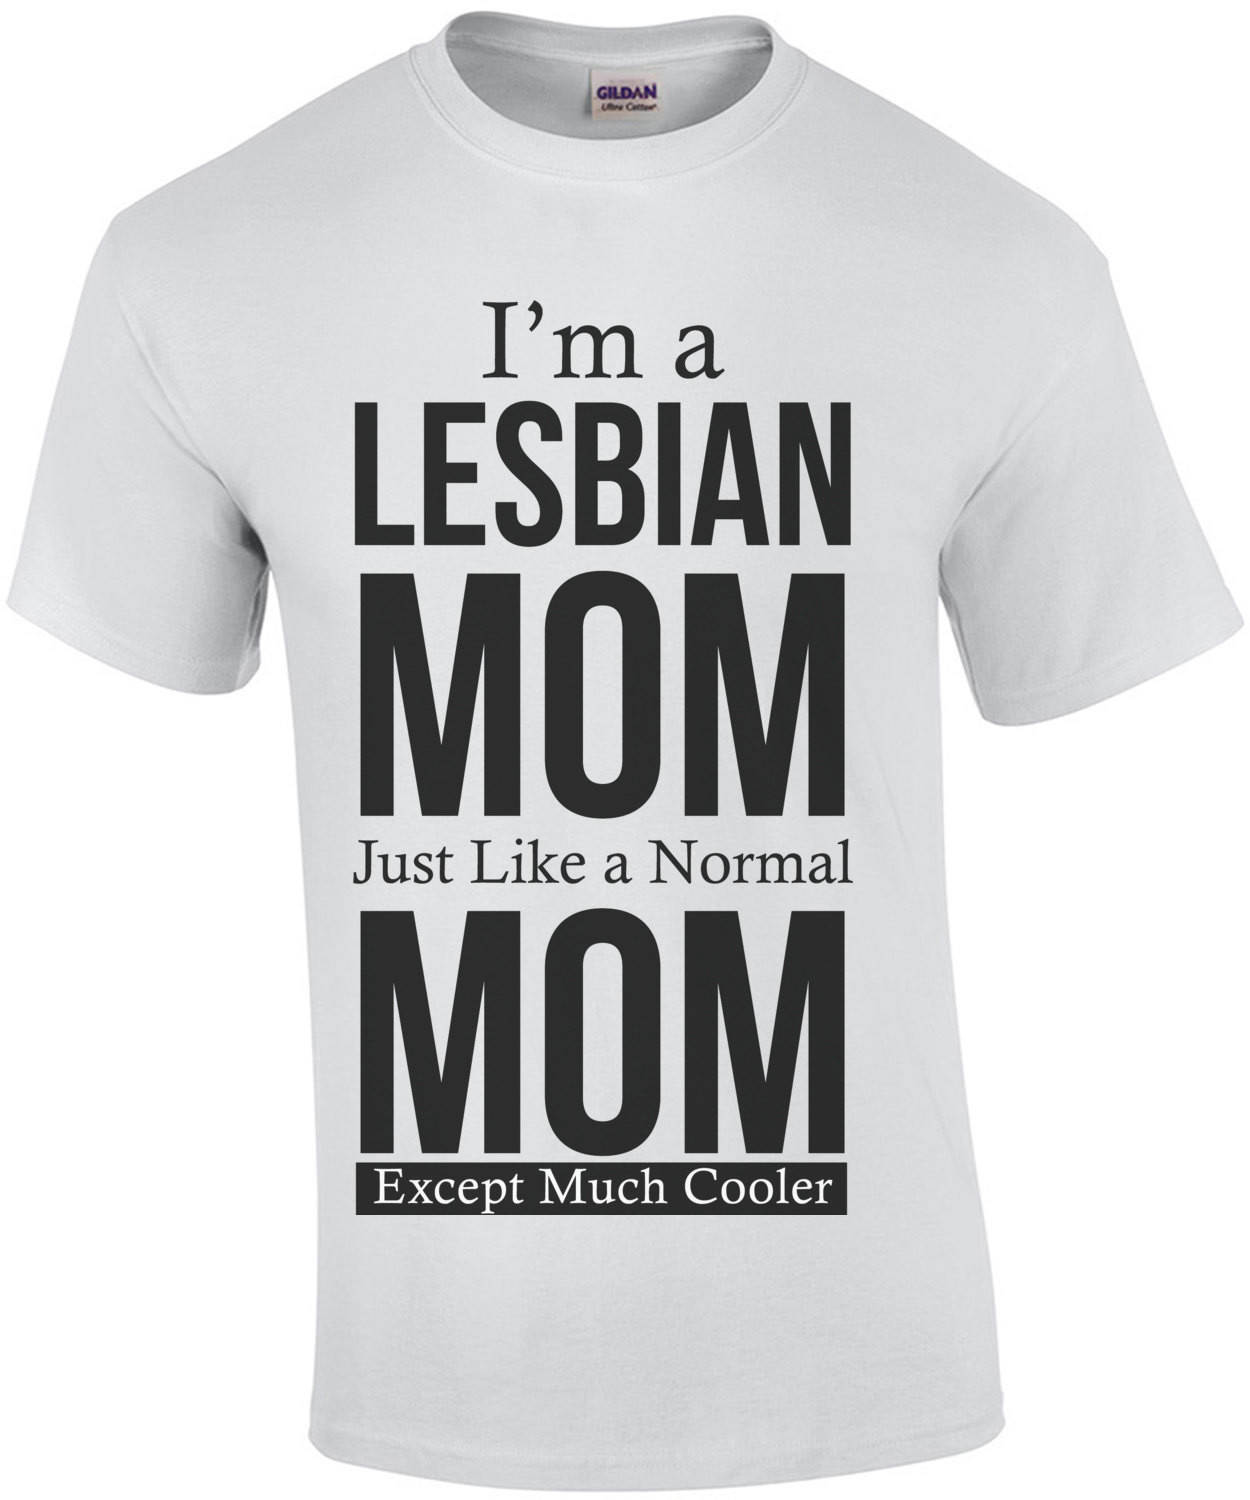 I'm a lesbian mom - just like a normal mom - expect much cooler - Lesbian T-Shirt